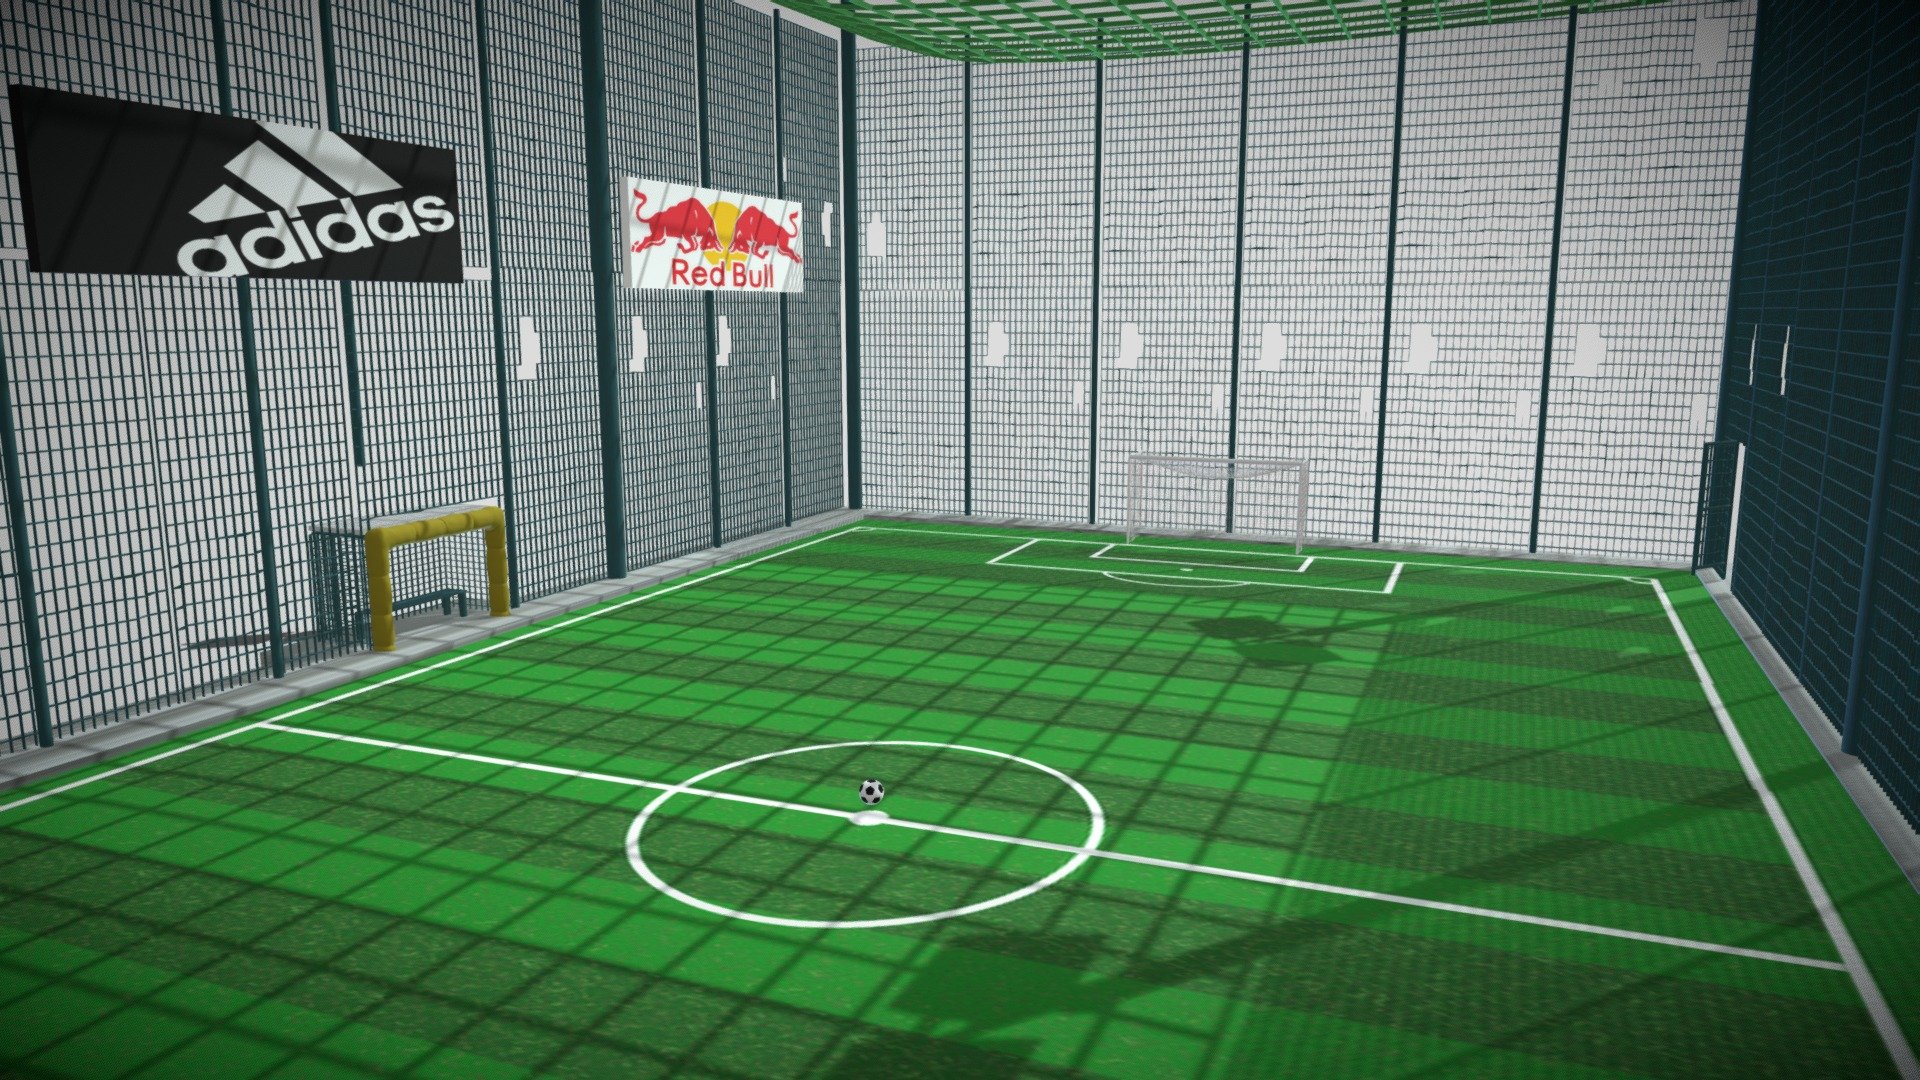 Simple Footbal 5 versus 5. Include nets, a classi ball and benches.  This and other stuff could be found working on a game here: https://www.instagram.com/mazzareththegame/ - Football 5v5 Court - Calcietto - Download Free 3D model by arca_done 3d model